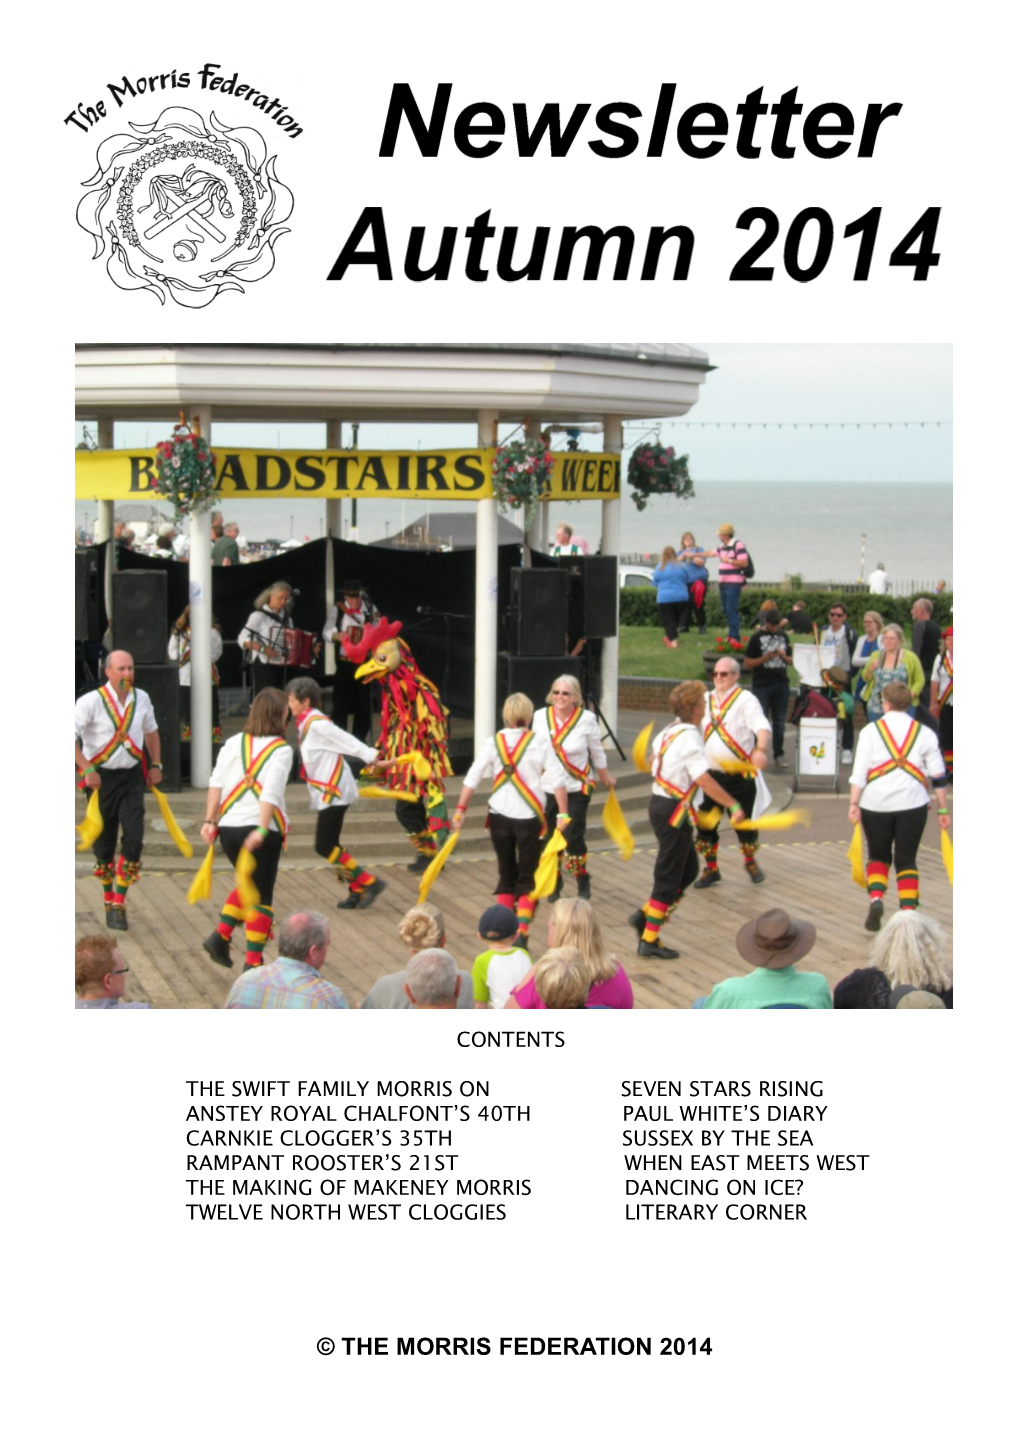 © the MORRIS FEDERATION 2014 Morris Federation Committee